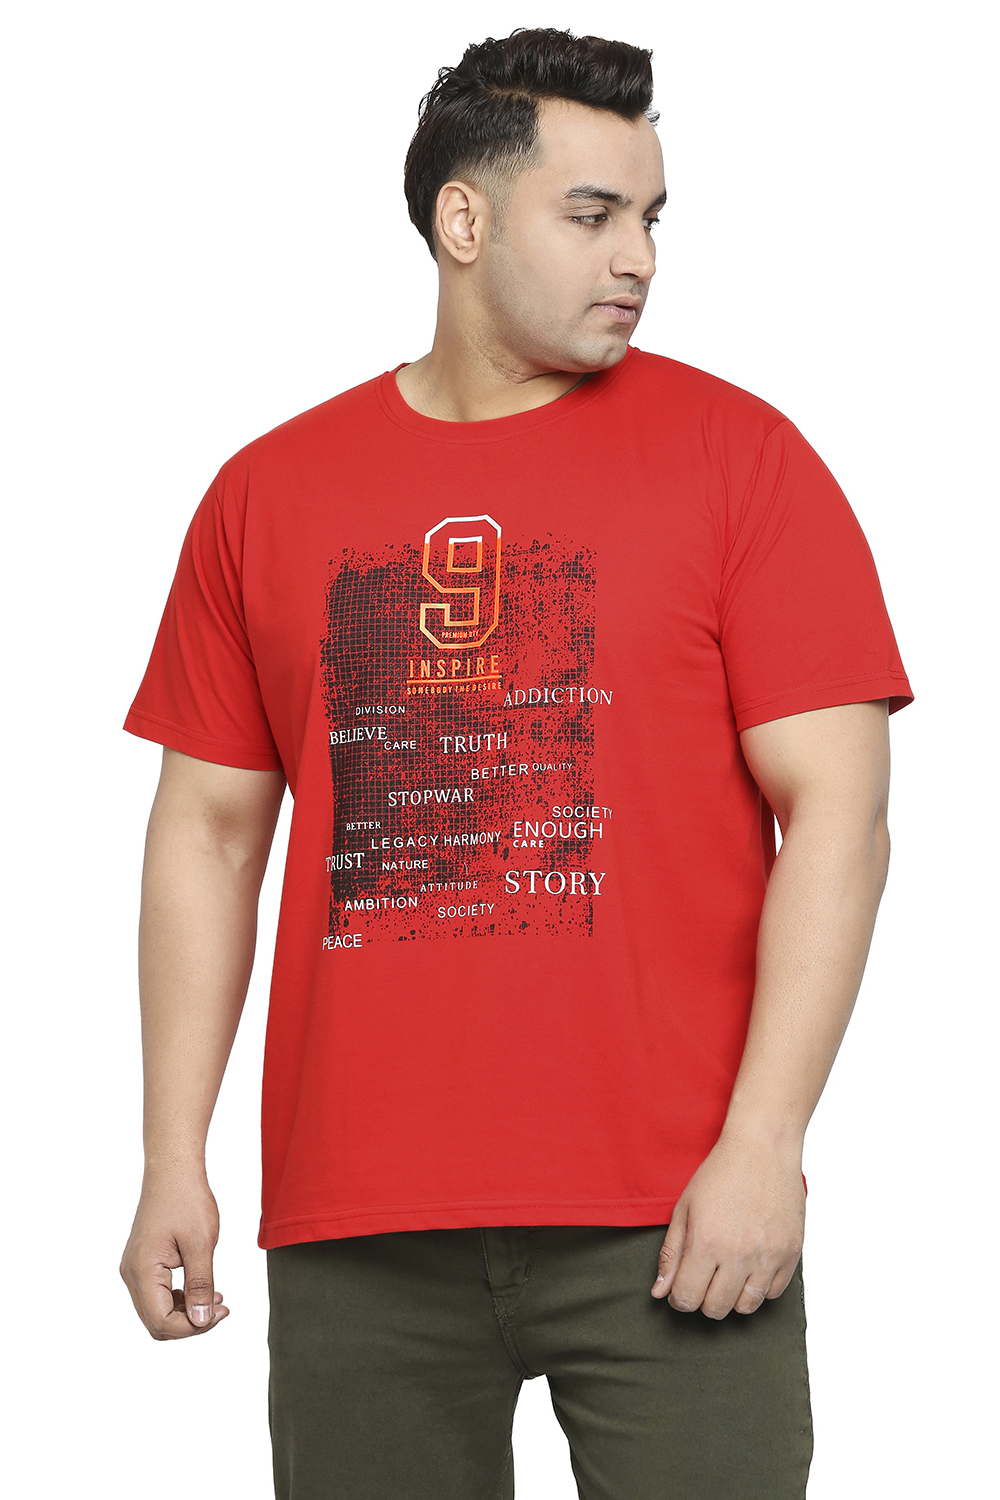 Plus Size Men's Round Neck 9 Inspire Printed Red T-shirt